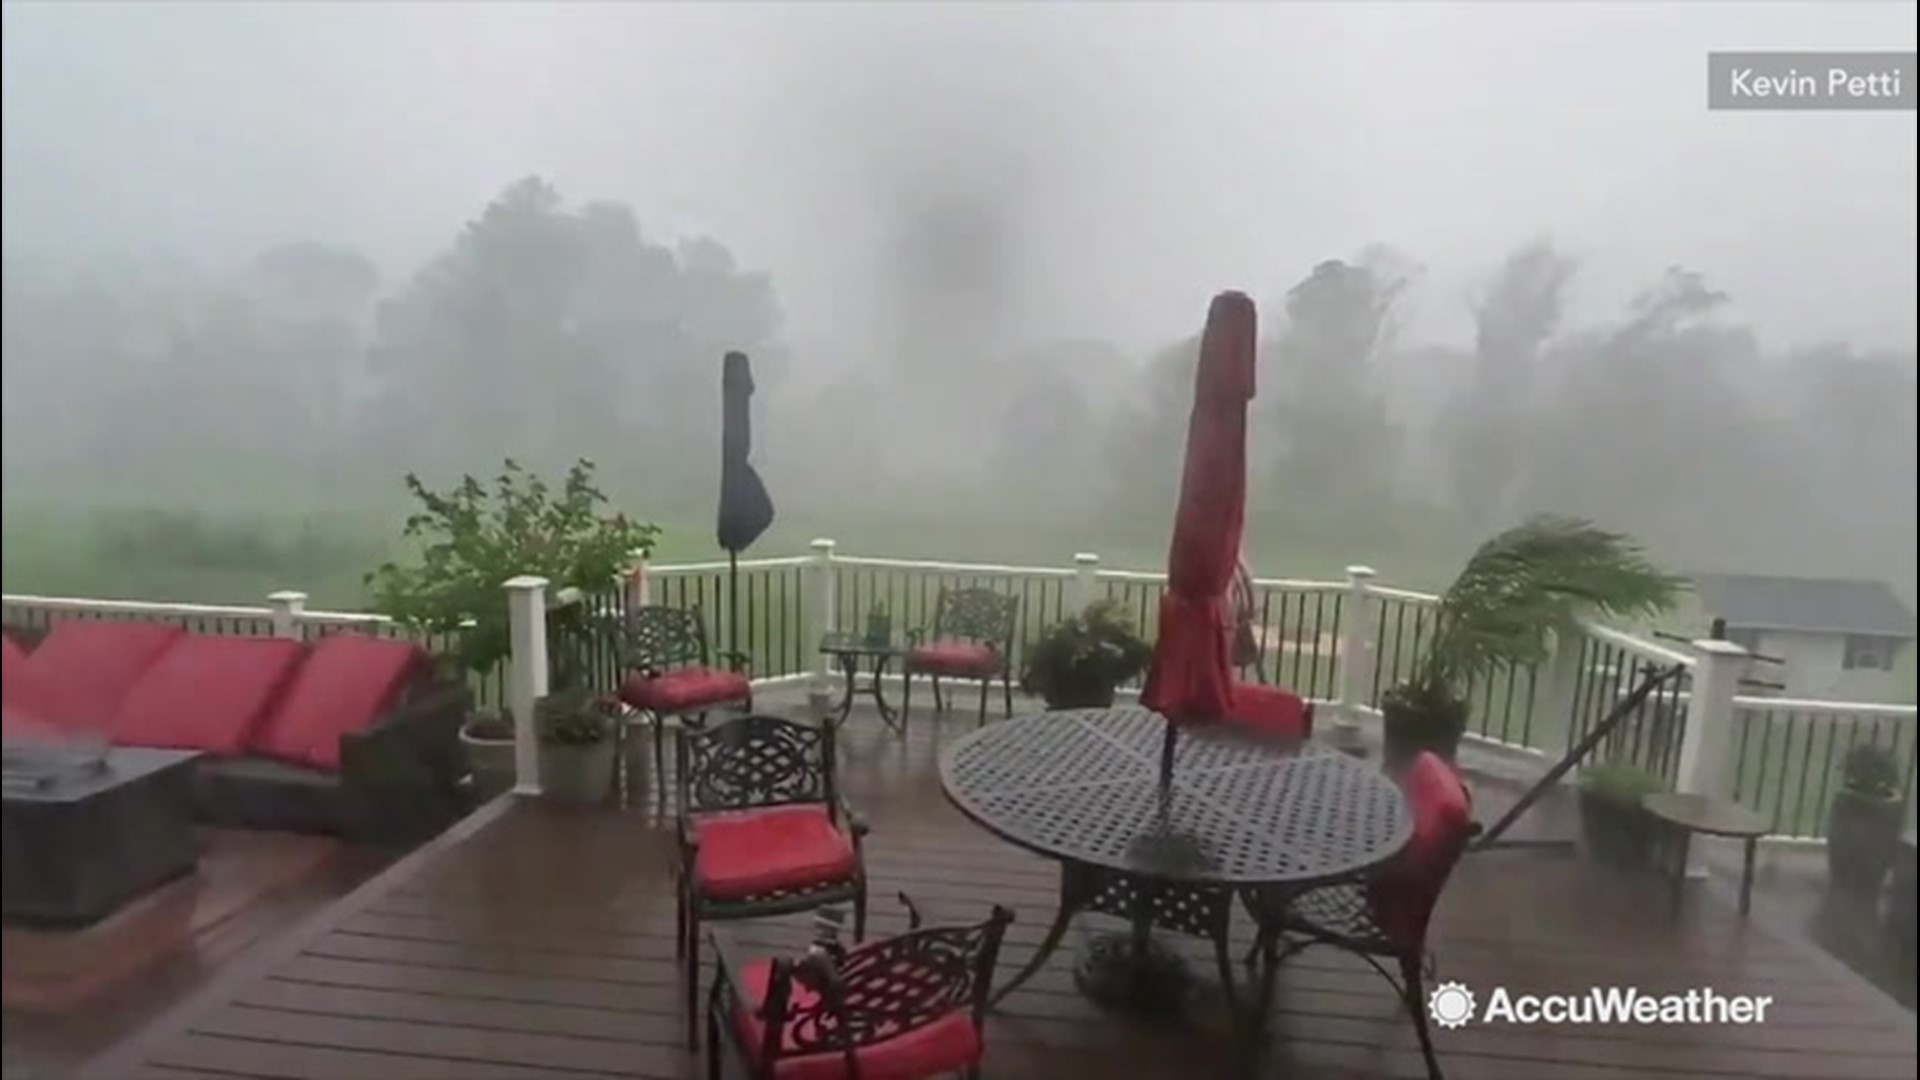 In Hillsborough, New Jersey, a storm has rolled in and is wreaking chaos on July 22.